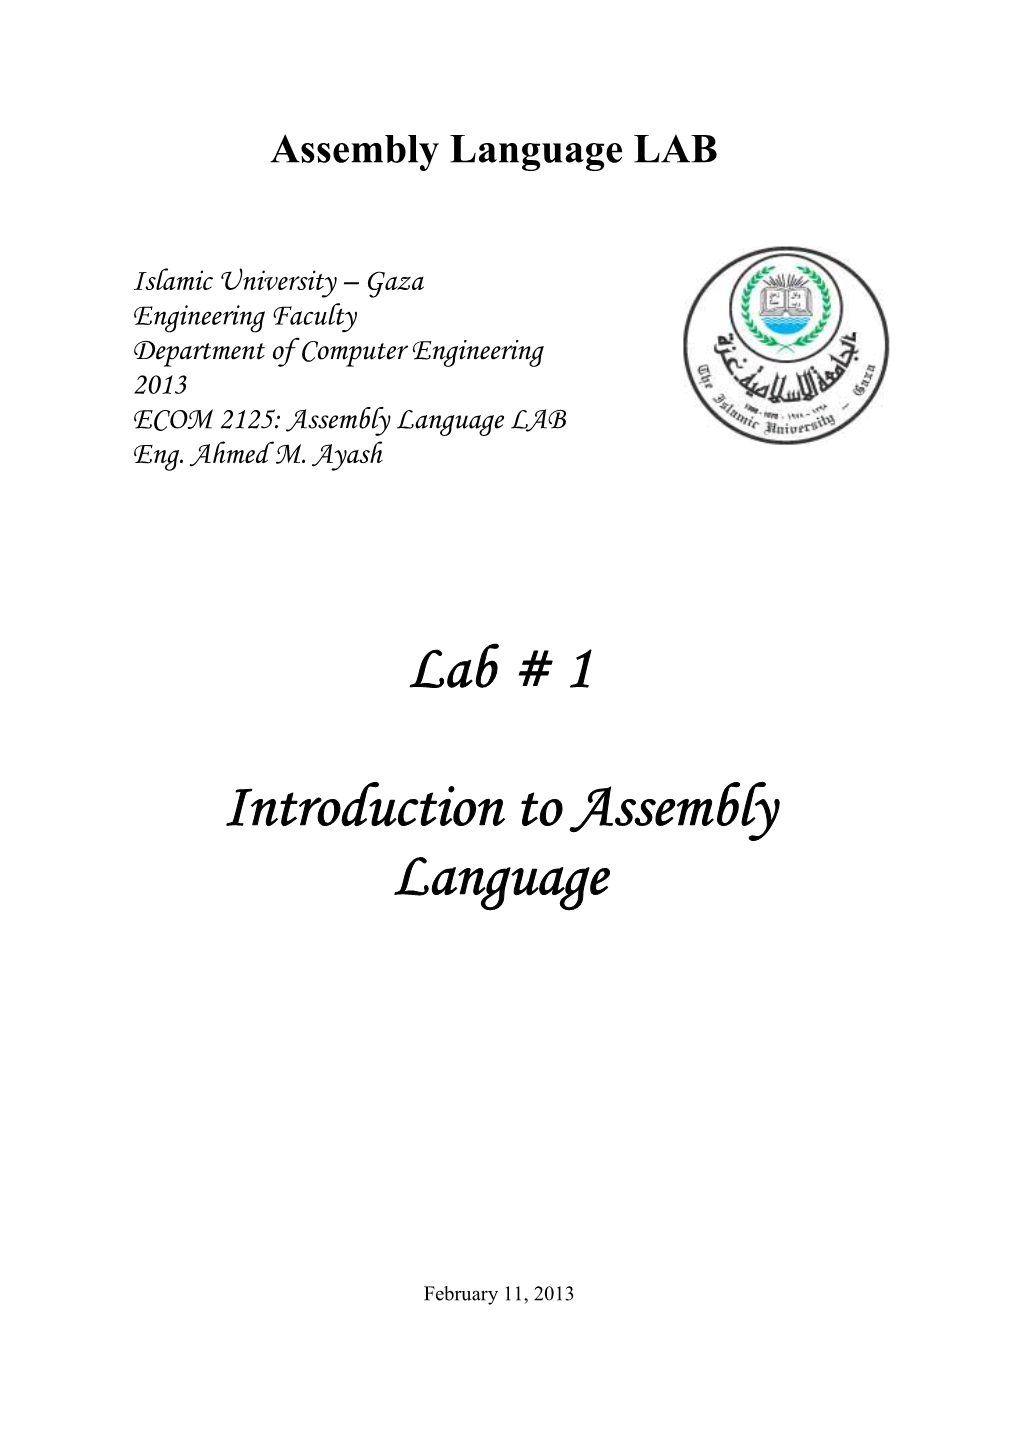 Lab # 1 Introduction to Assembly Language